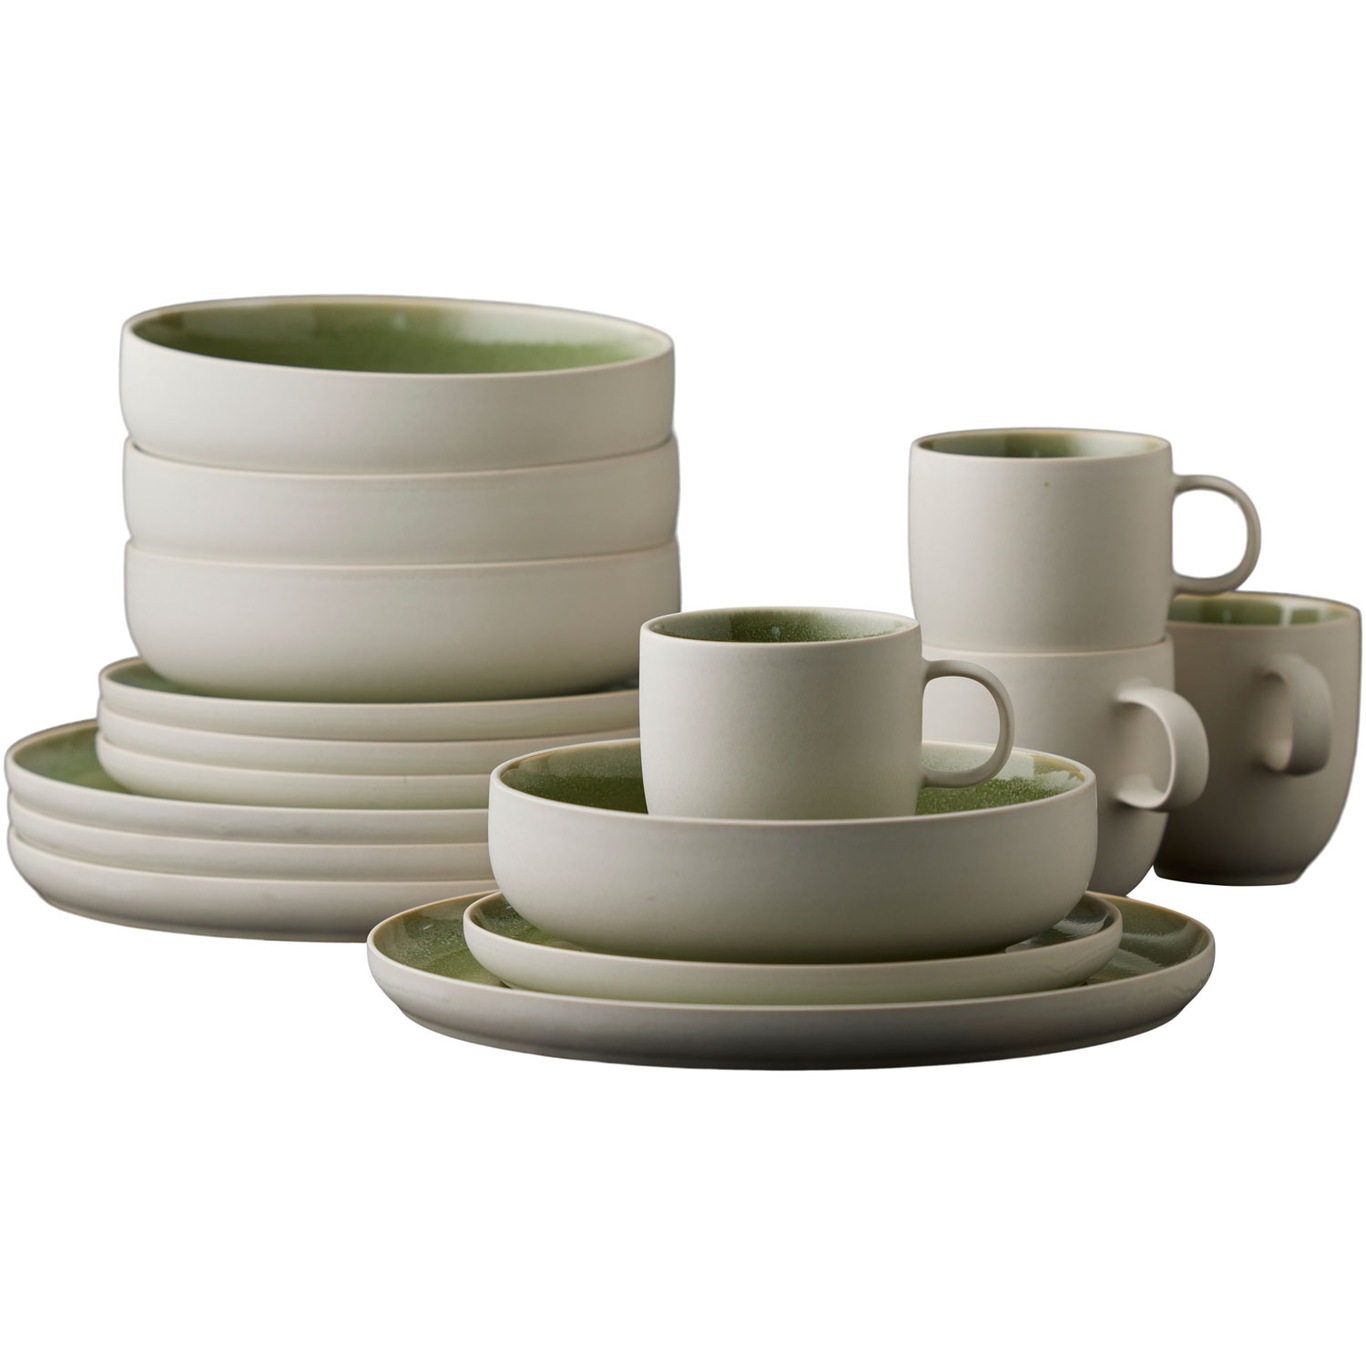 North Tableware Set 16 Pieces, Matte White/Shiny Moss